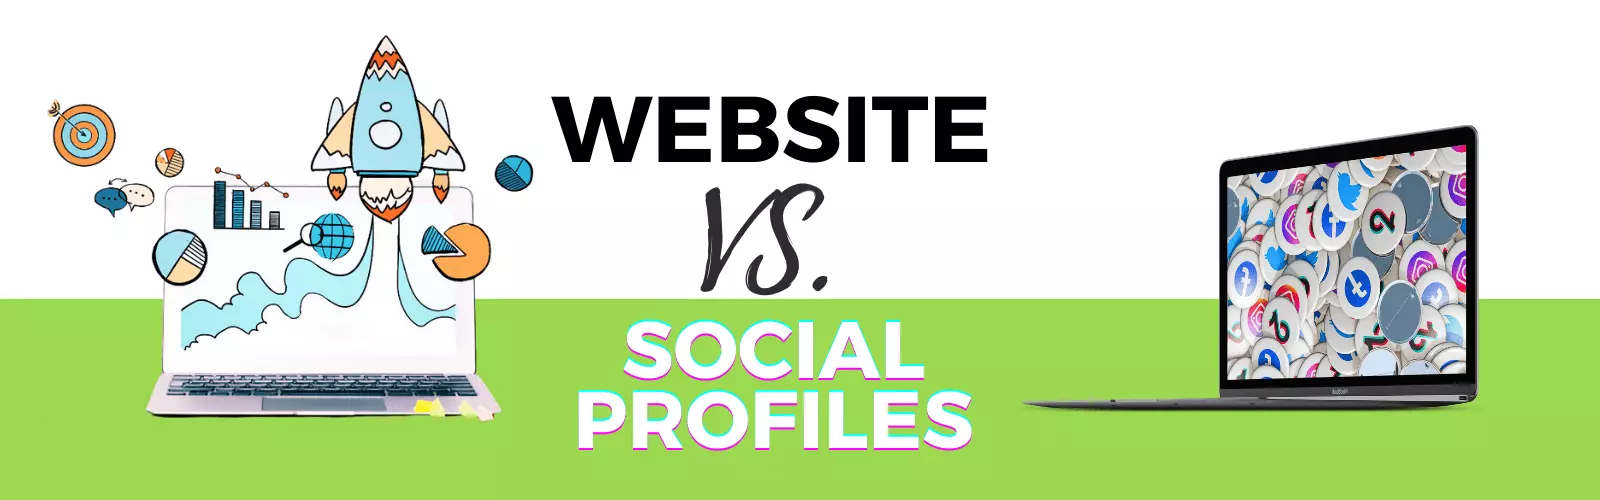 5 Reasons to Have an Official Website Over Just Social Media Profiles - Article Header